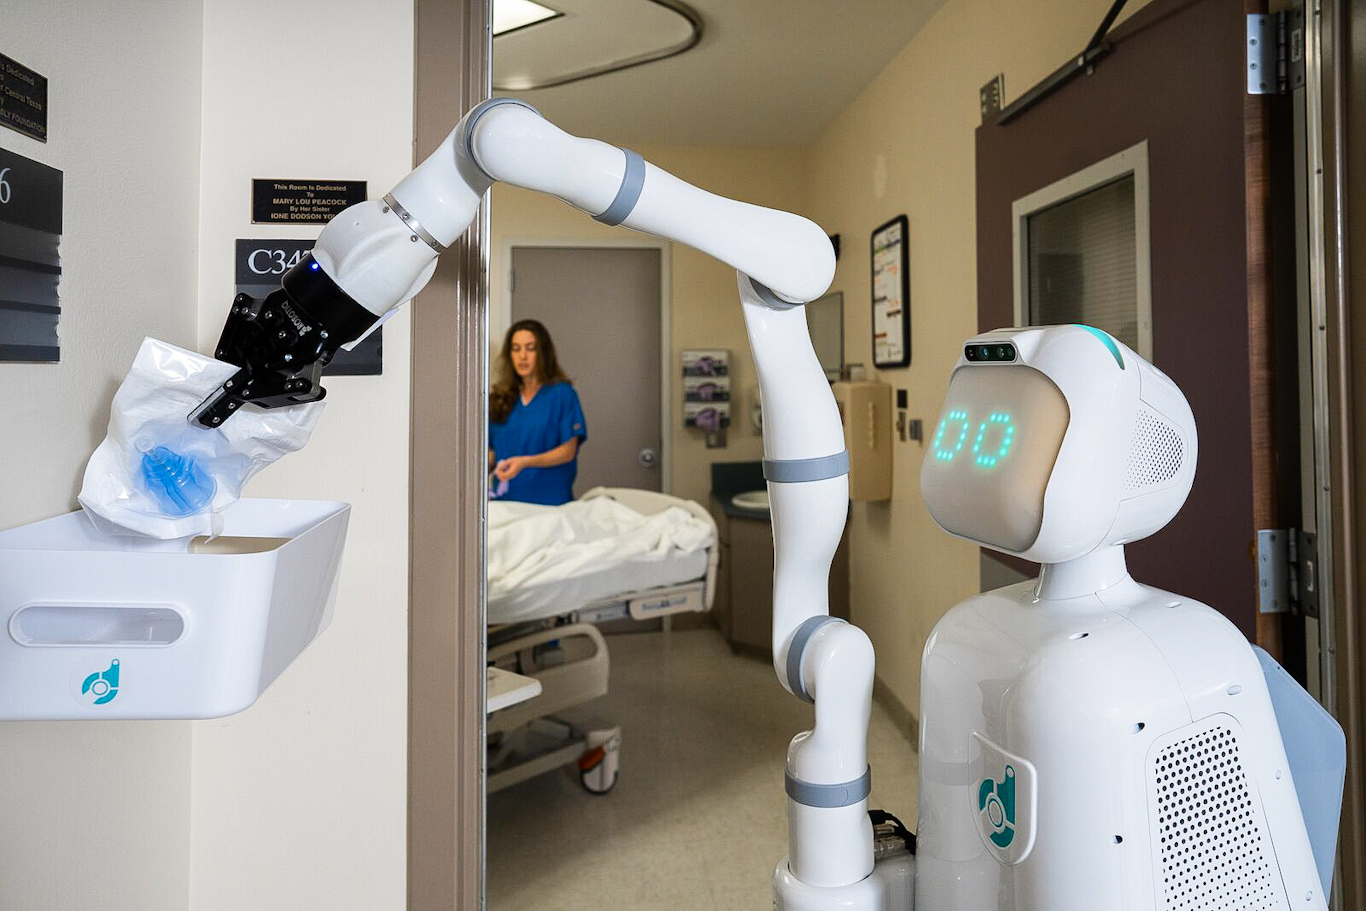 Robotics in Healthcare: How Robot Pet Therapy Can Address Mental Health Issues